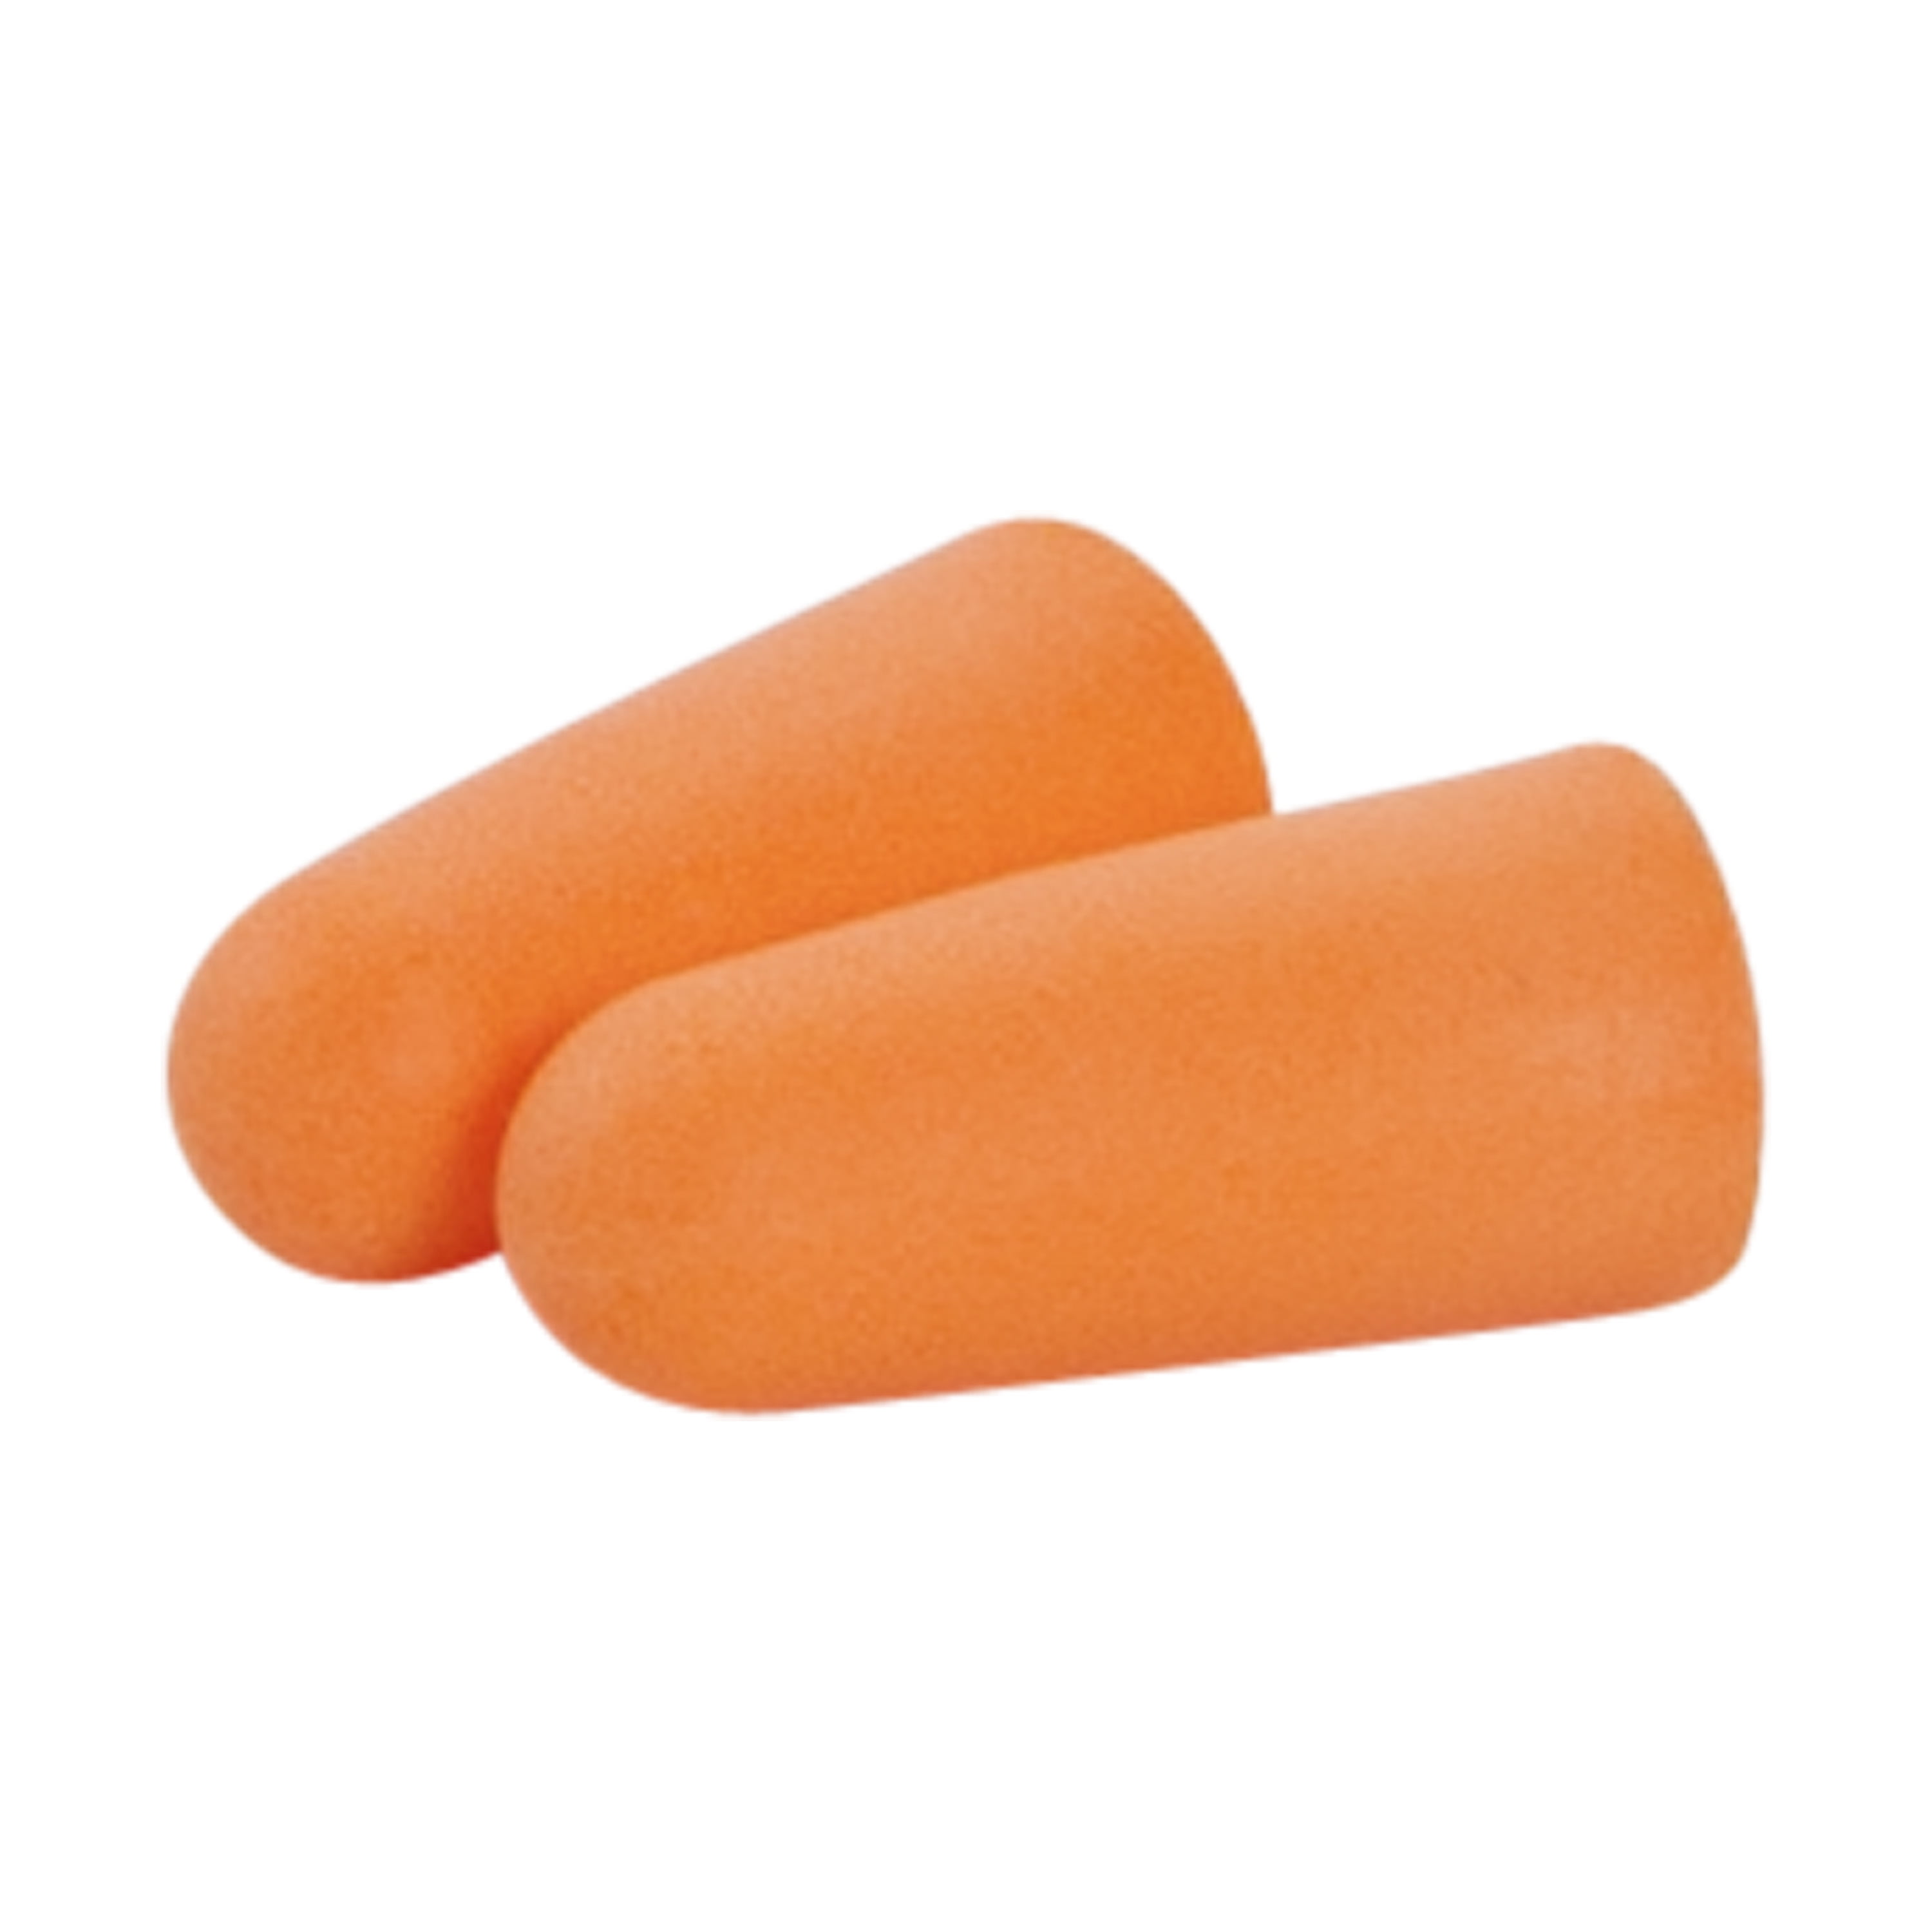 Radians Uncorded Foam Earplugs 50 Pairs Individually Wrapped Nrr33 for sale online 